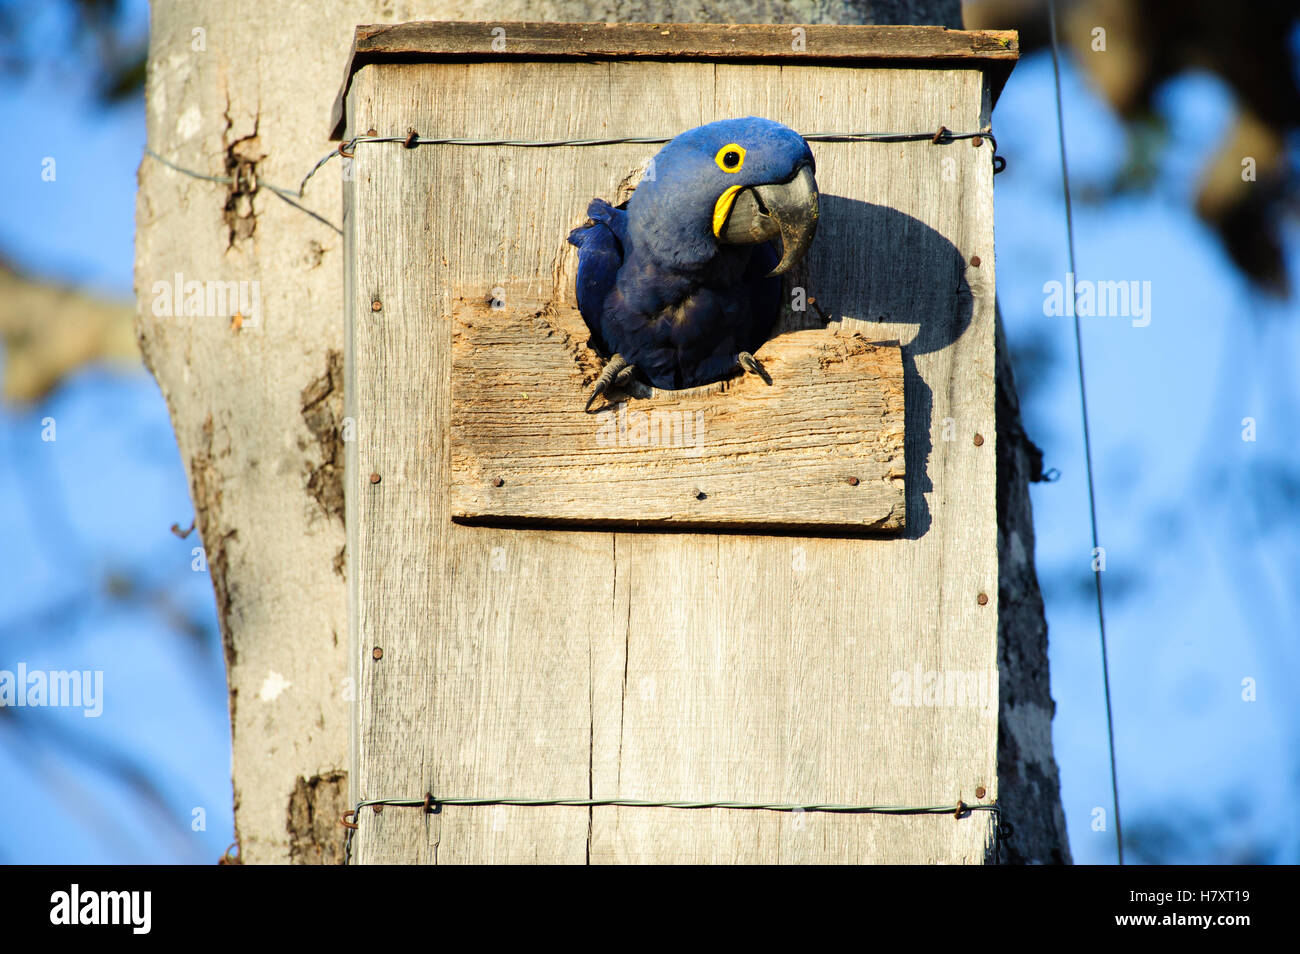 Hyacinth Macaw (Anodorhynchus hyacinthinus) emerging from nest box installed by researcher Neiva Guedes, Pantanal, Brazil Stock Photo